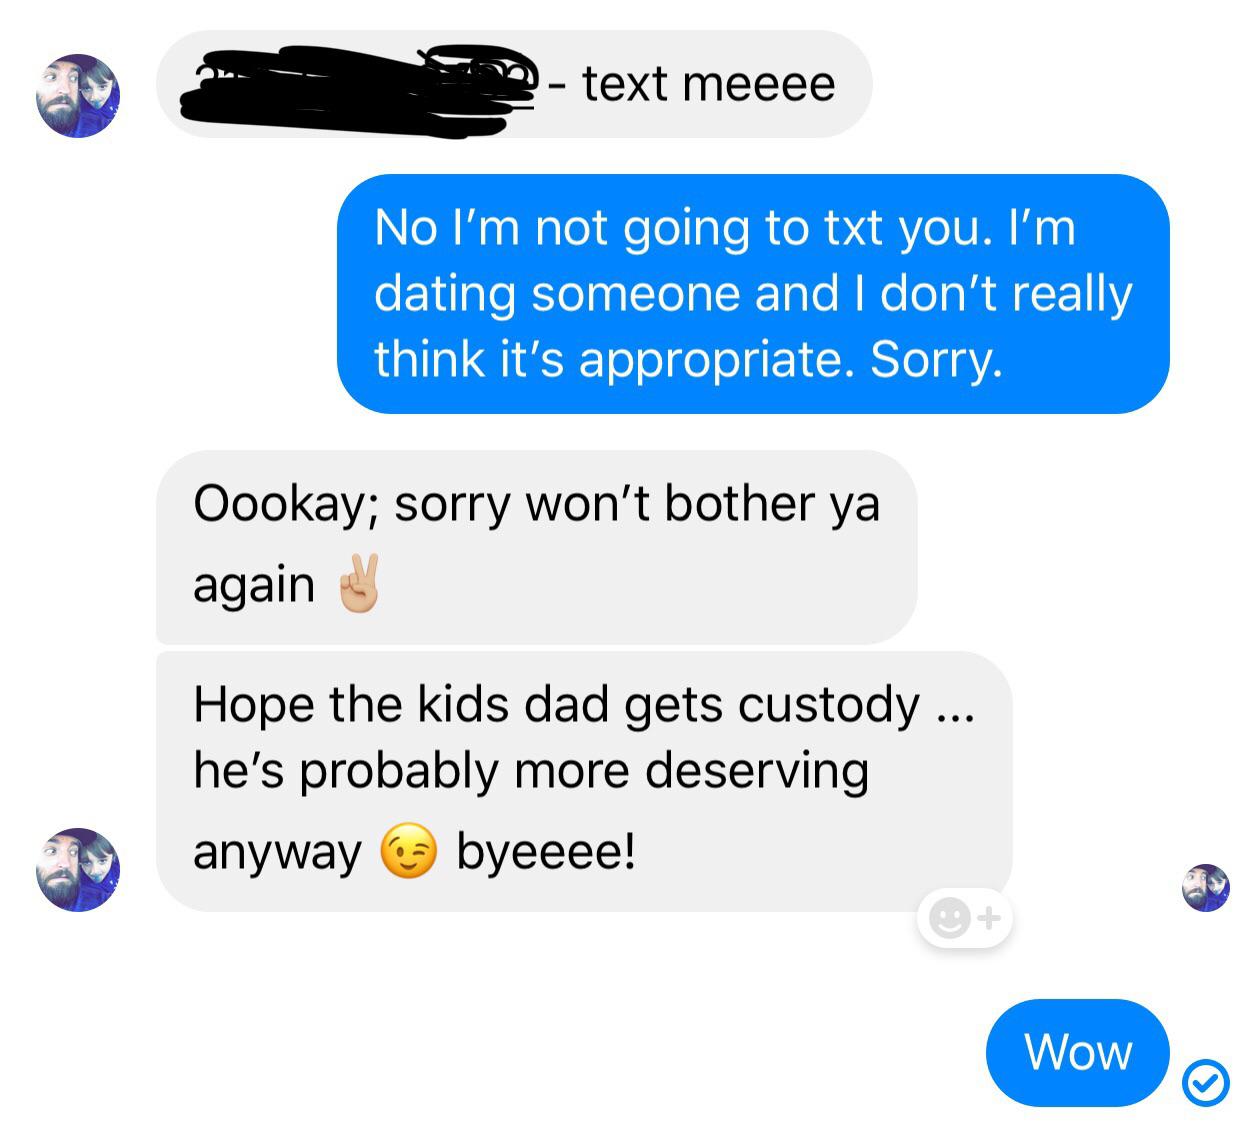 text meeee No I'm not going to txt you. I'm dating someone and I don't really think it's appropriate. Sorry. Oookay; sorry won't bother ya again Hope the kids dad gets custody ... he's probably more deserving anyway byeeee! Wow Wow